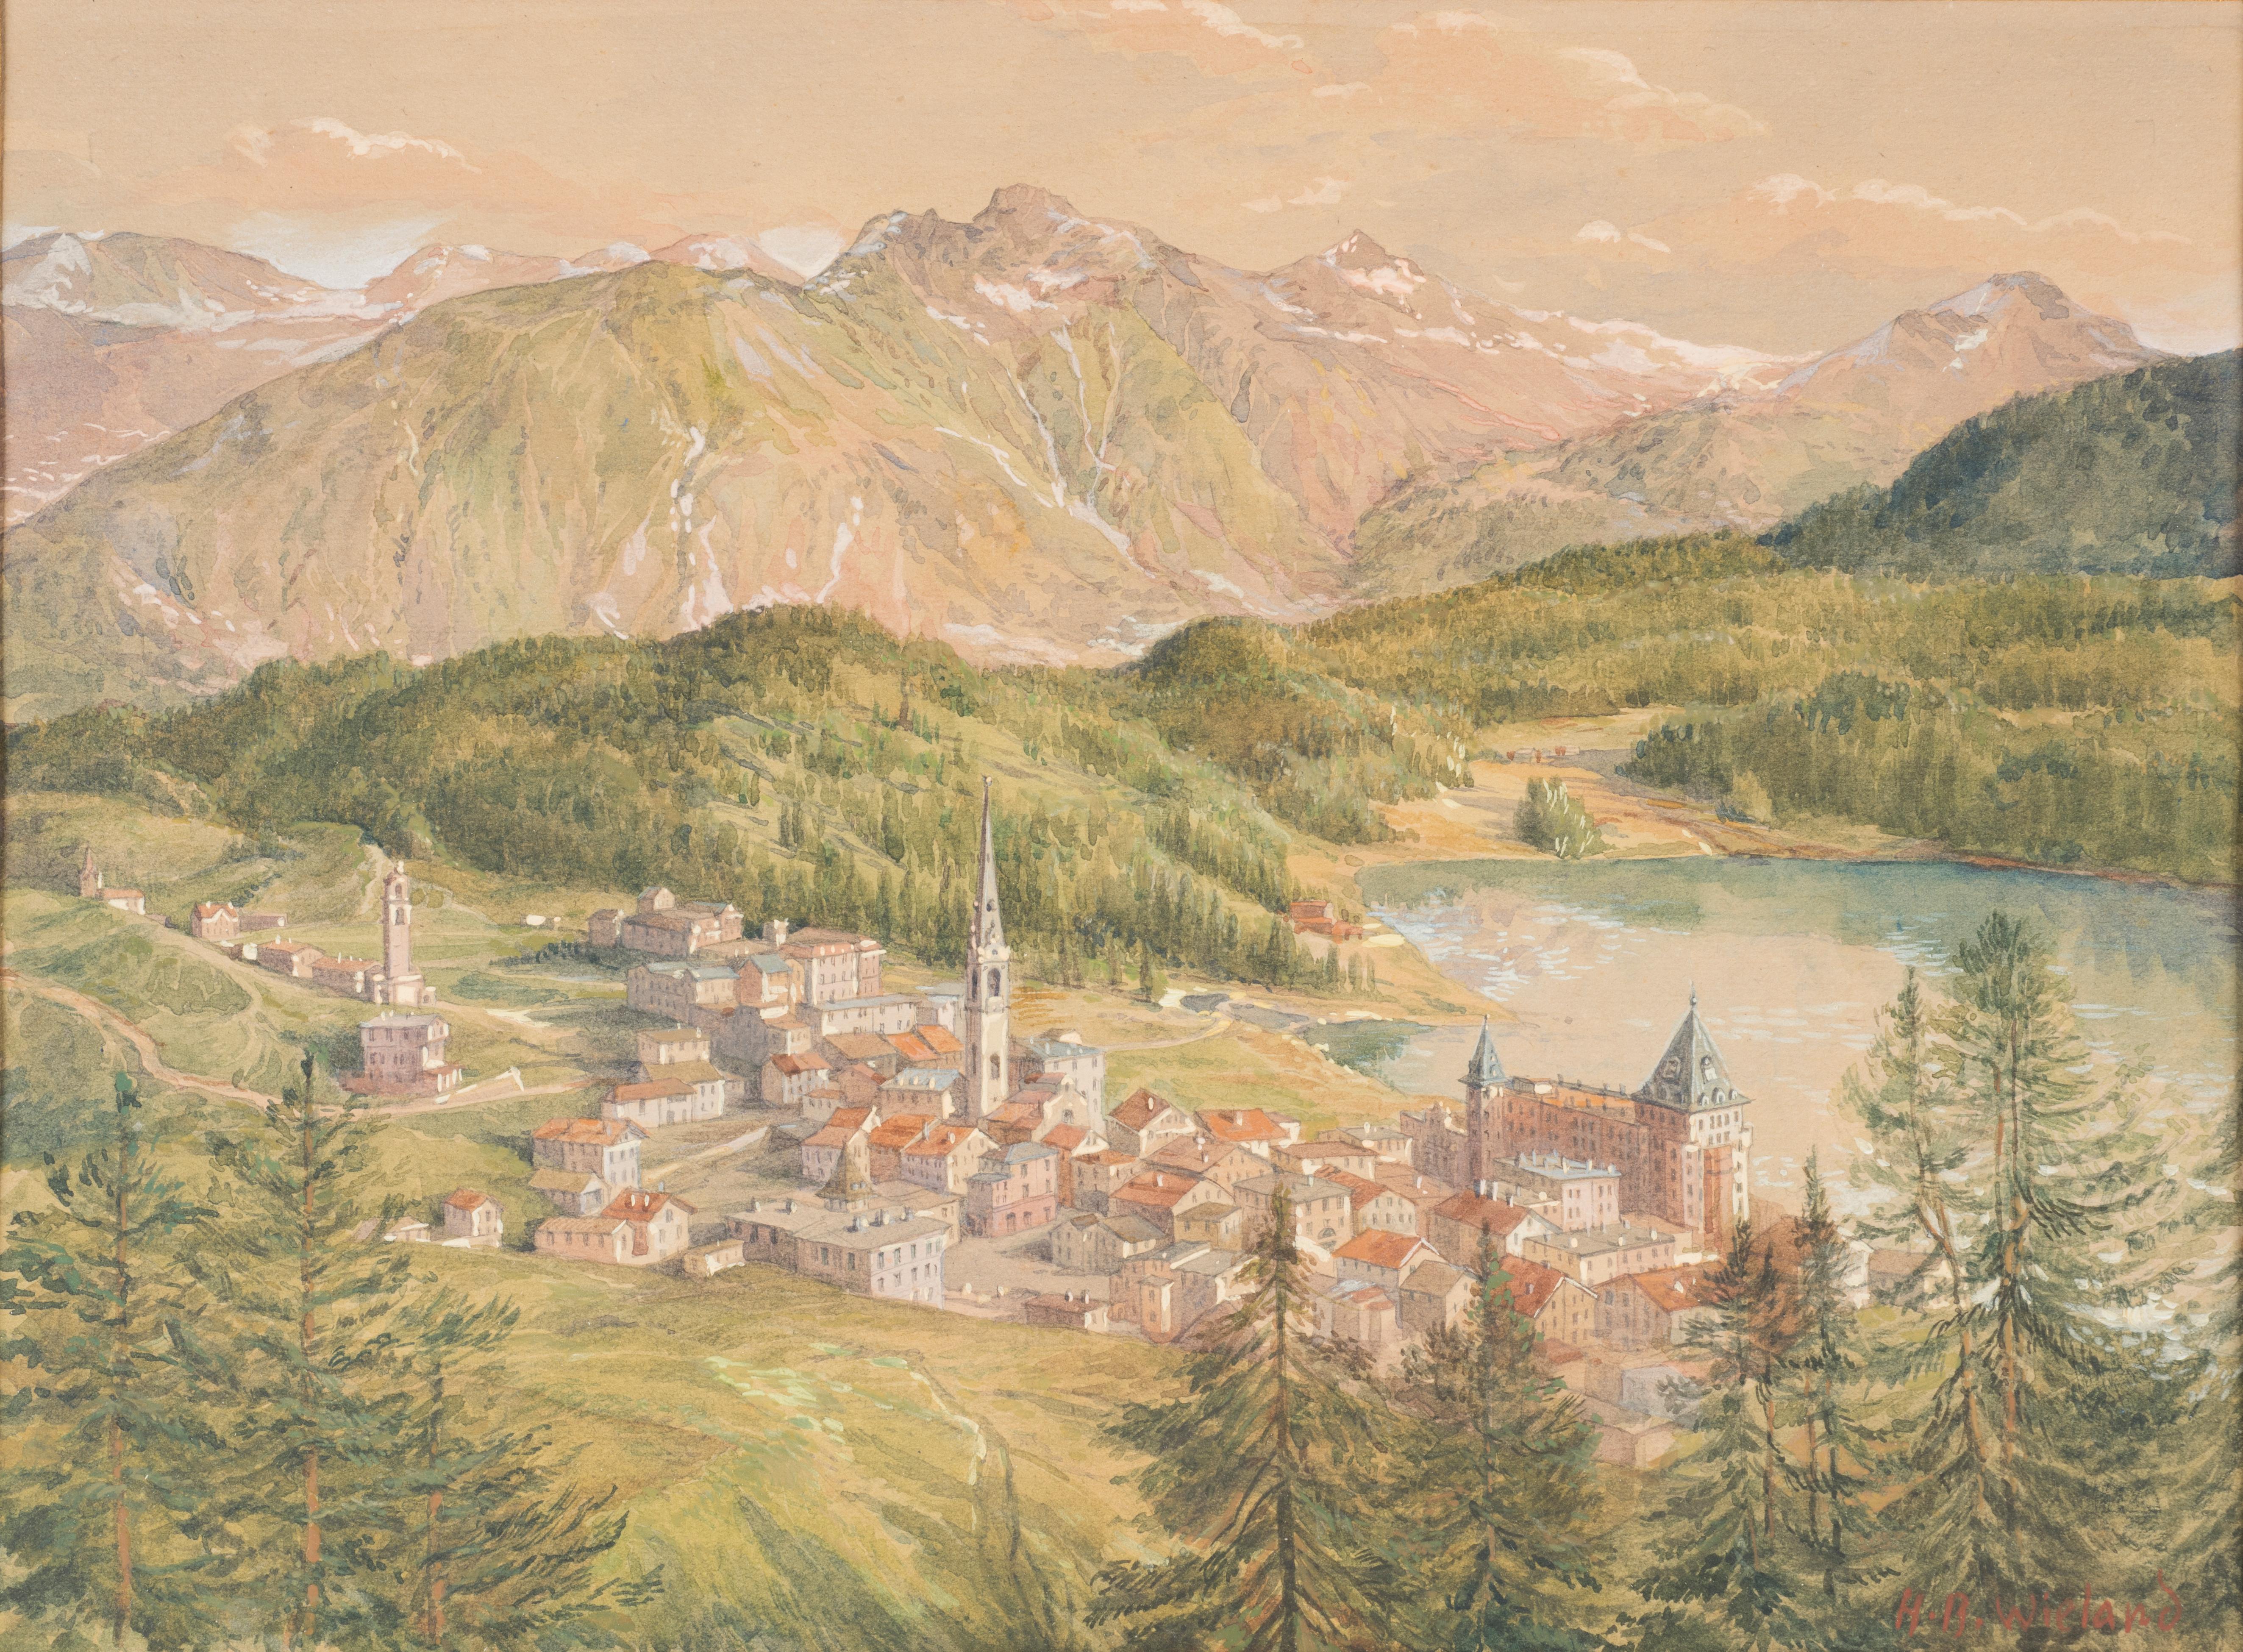 View of Sankt Moritz - Watercolor on paper by H. B. Wieland - 1900/1920